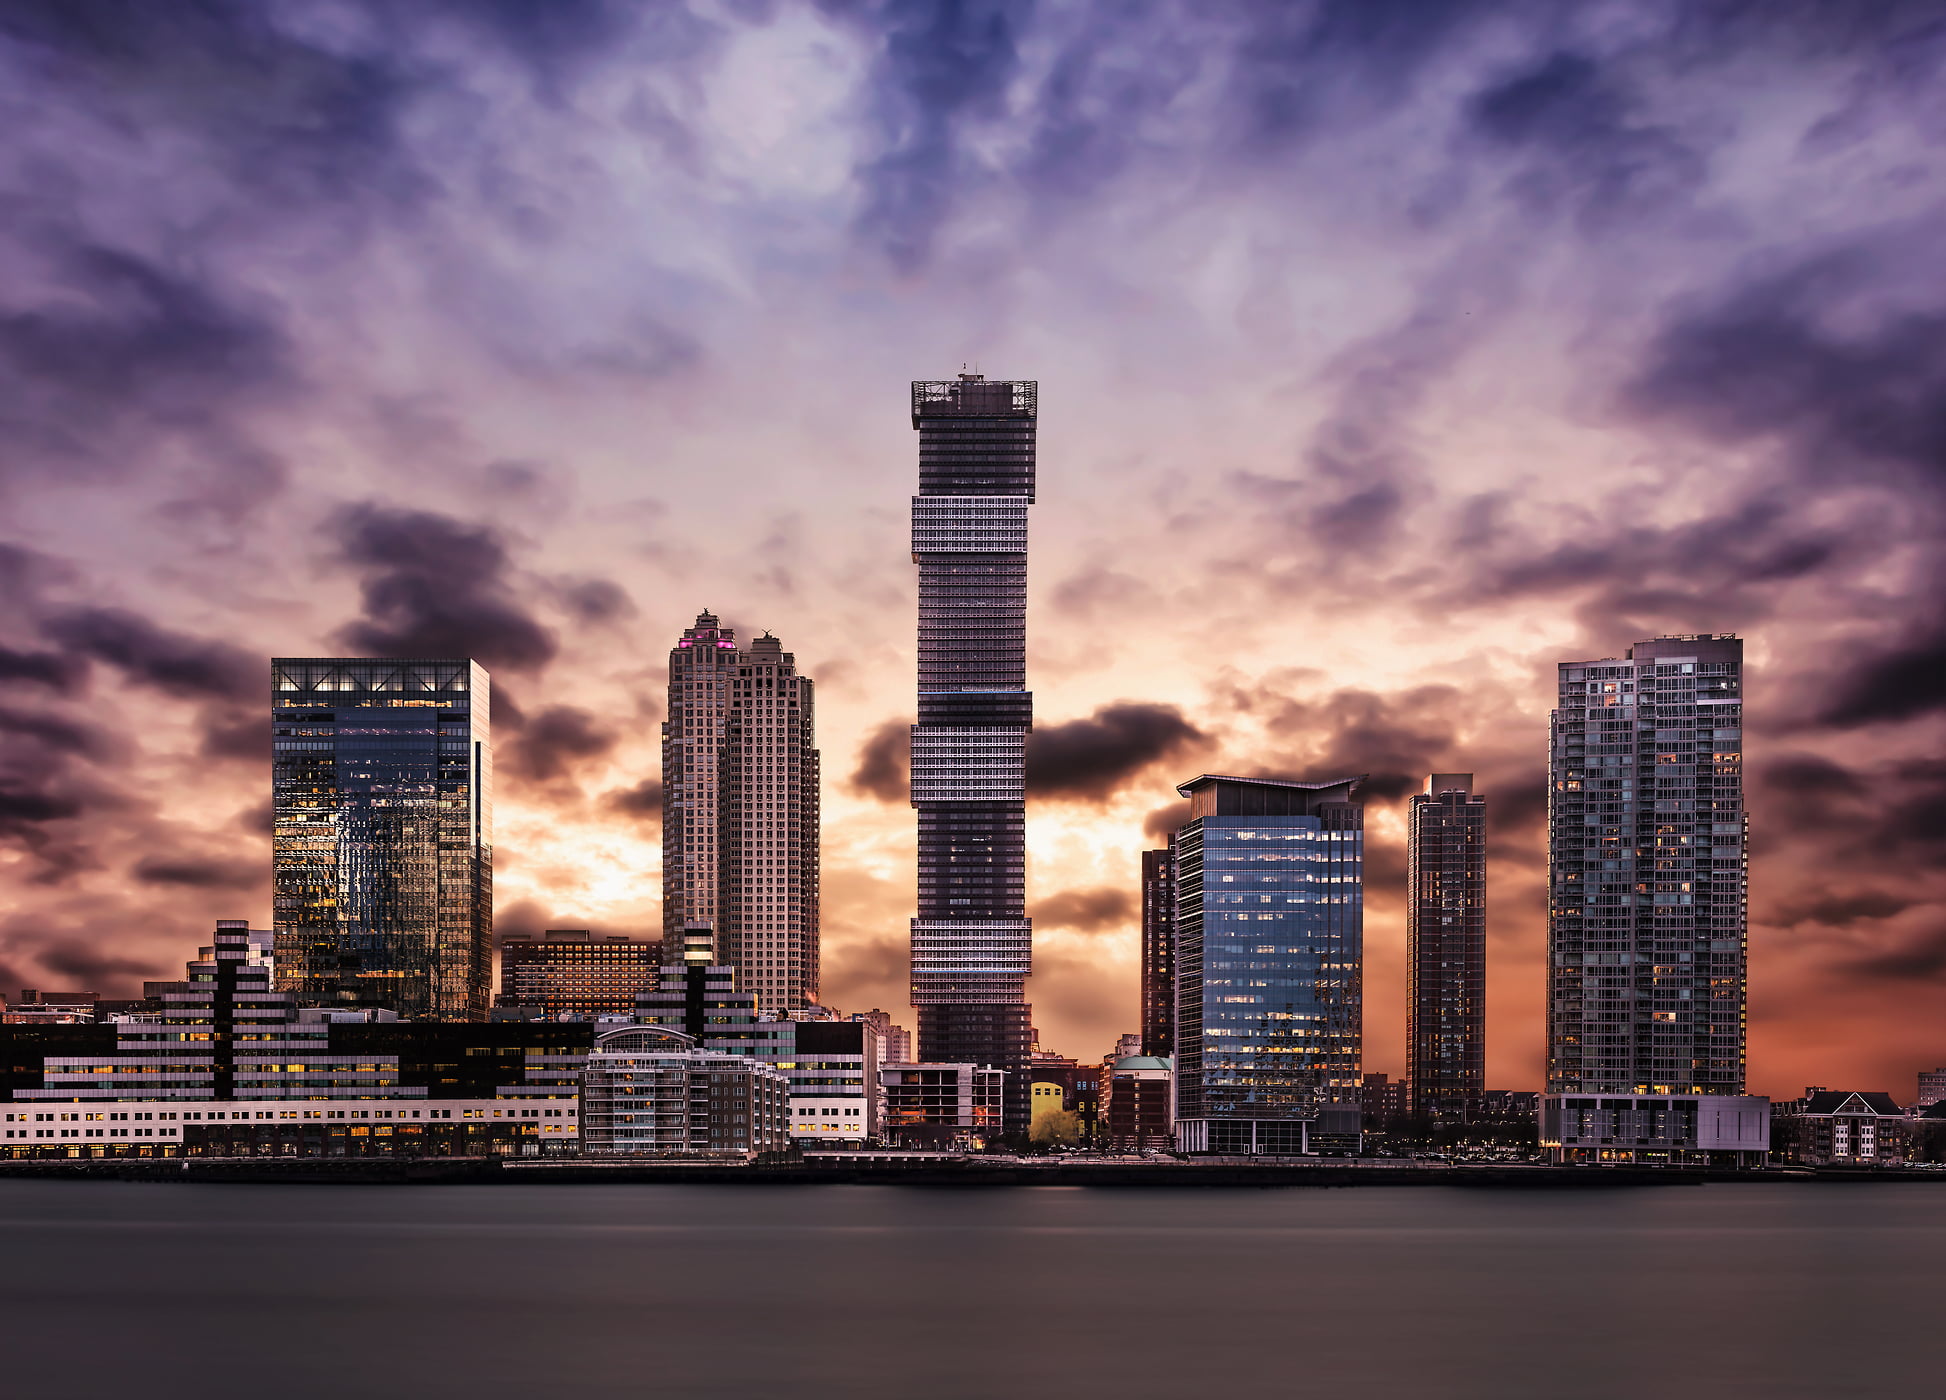 383 megapixels! A very high definition cityscape VAST photo of the Jersey City skyscrapers including URL Harborside 1 at sunset in New Jersey ; created by Dan Piech.